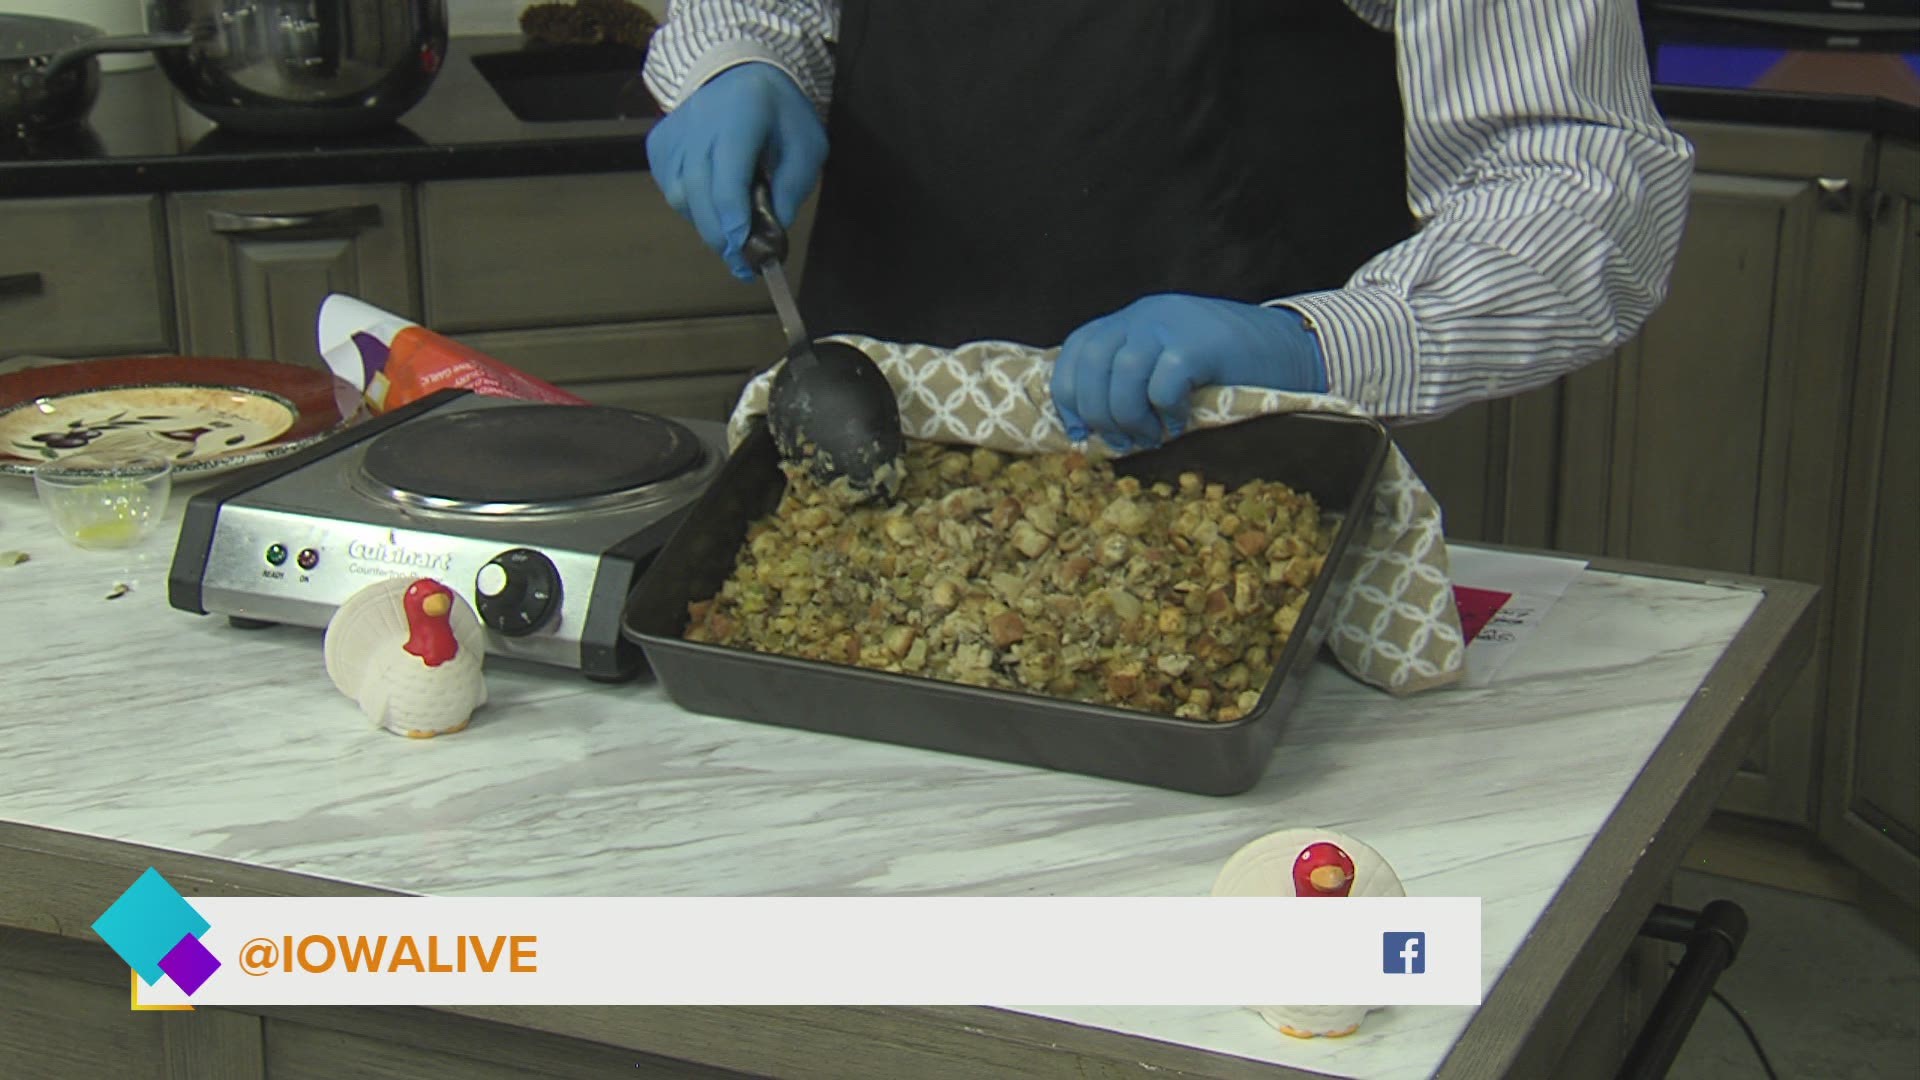 It has become an Iowa Live tradition to share Lou's Mom's delicious stuffing recipe for the holidays